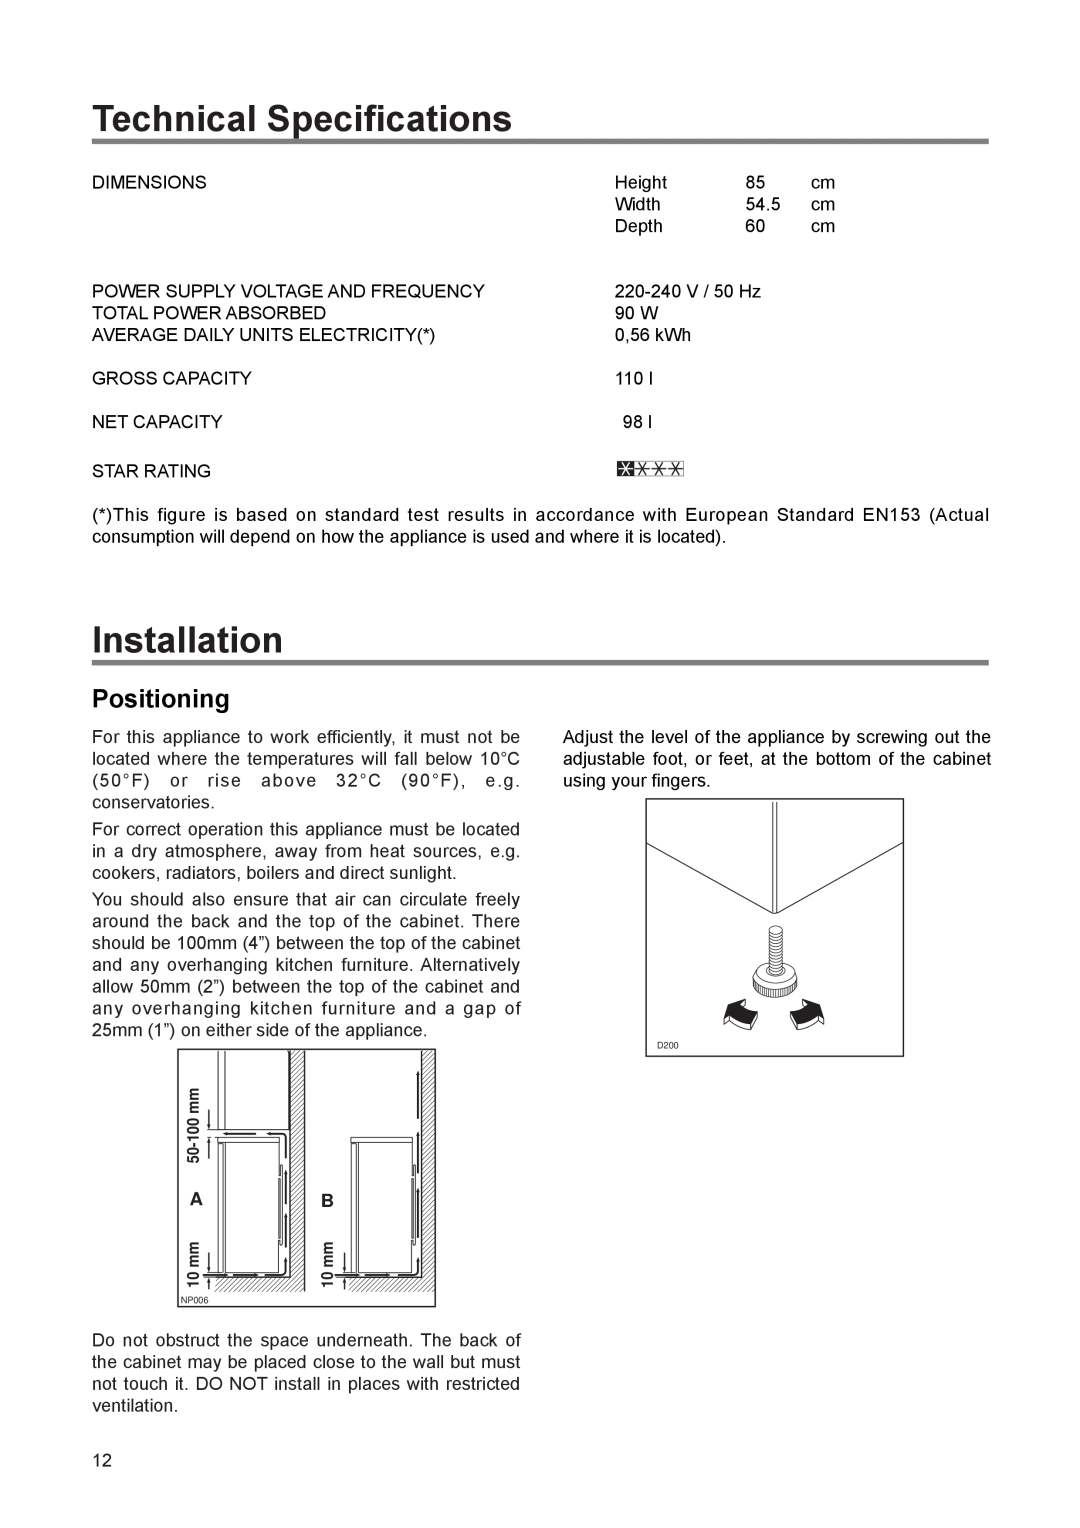 Zanussi ZEUT 6173 S manual Technical Specifications, Installation, Positioning 